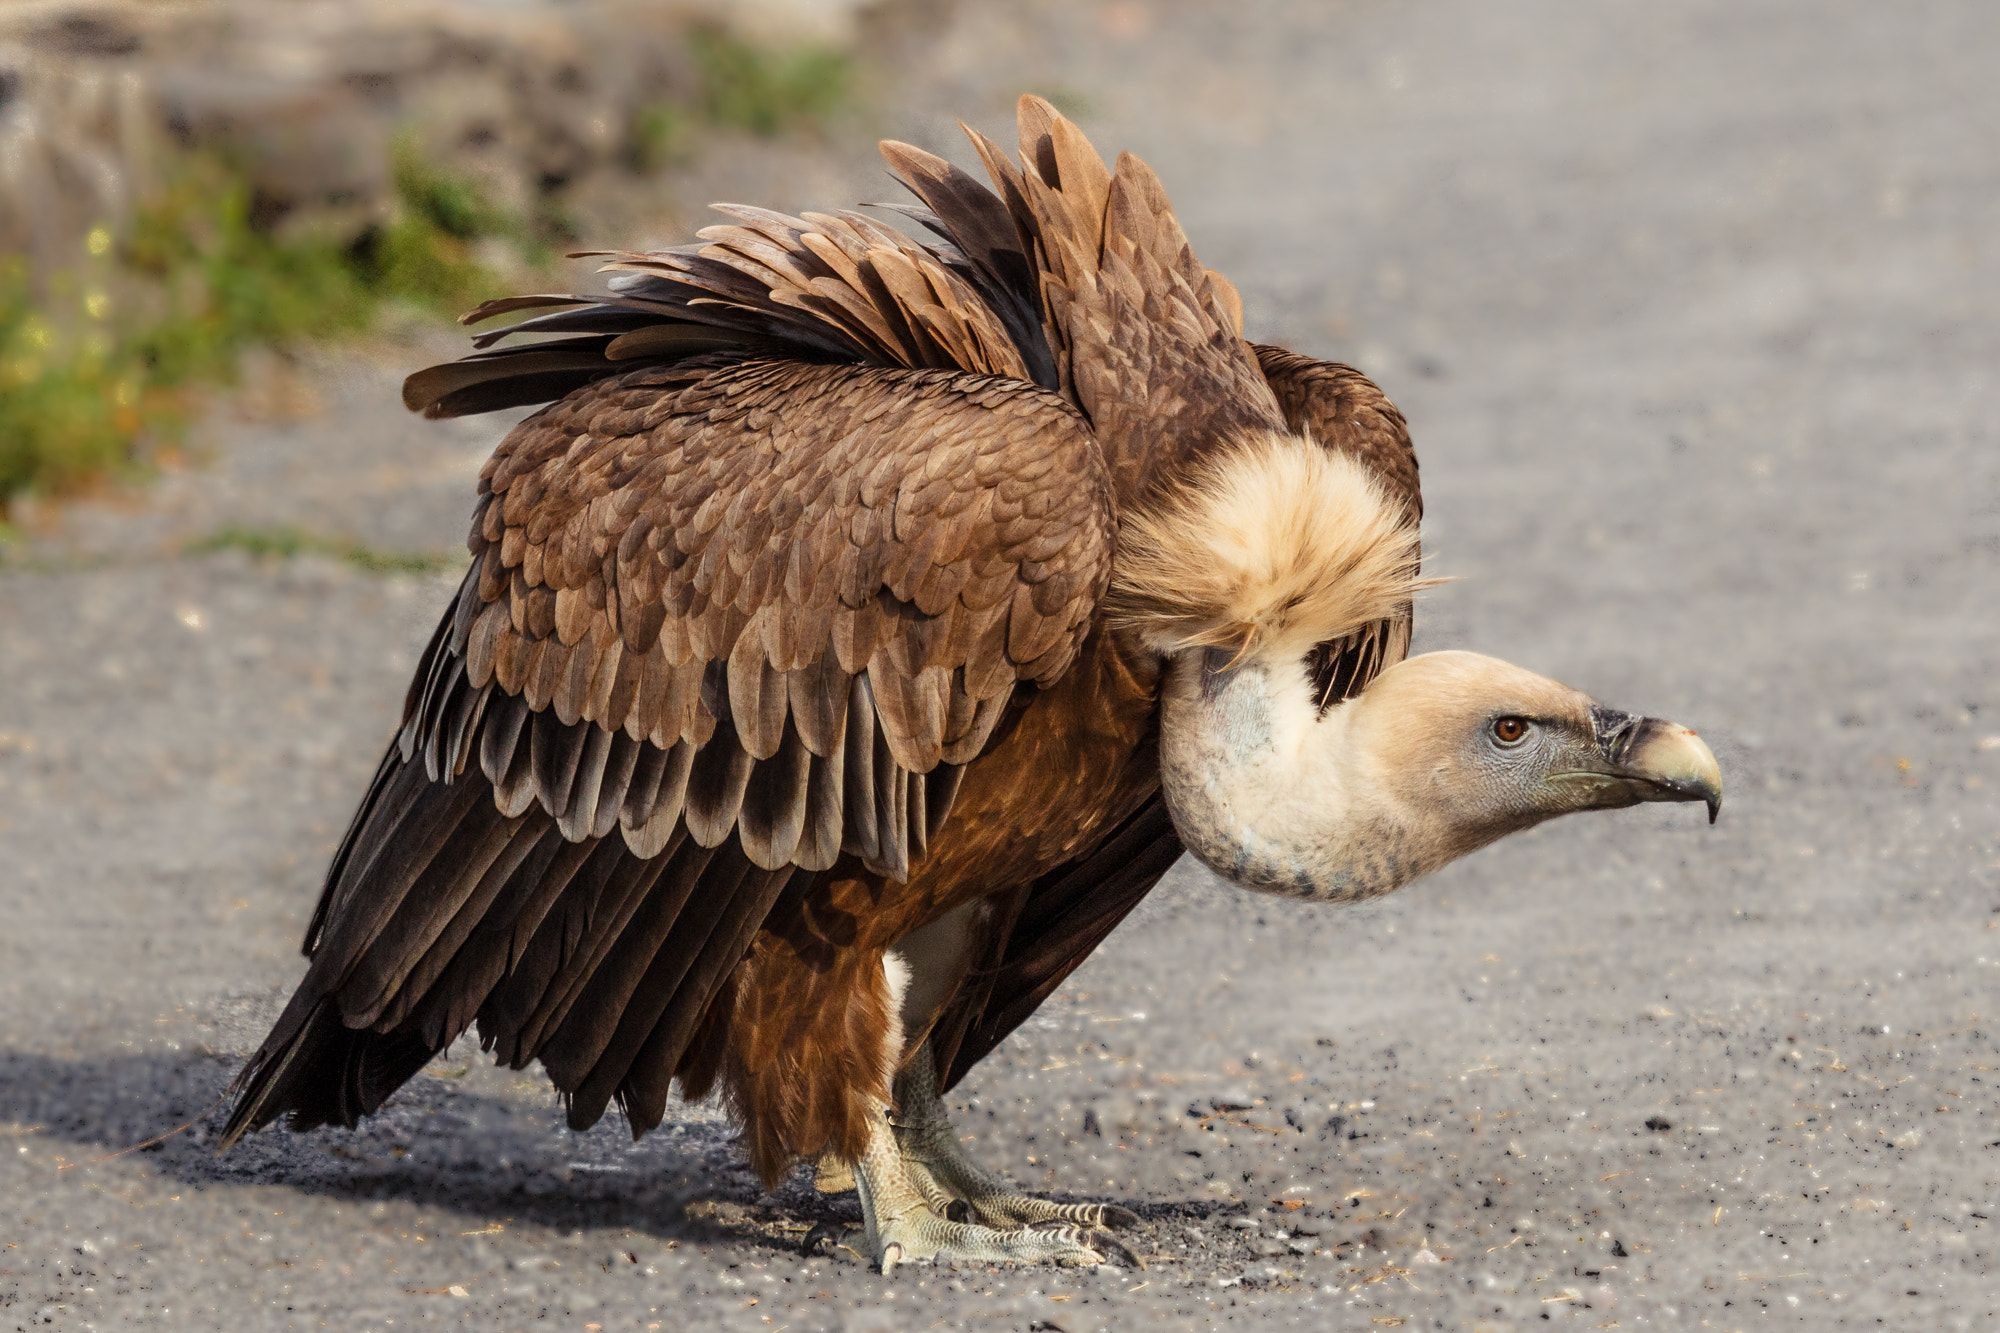 Griffon (Bird): The griffon vulture, A scavenger, feeding mostly from carcasses of dead animals which it finds by soaring over open areas. 2000x1340 HD Background.